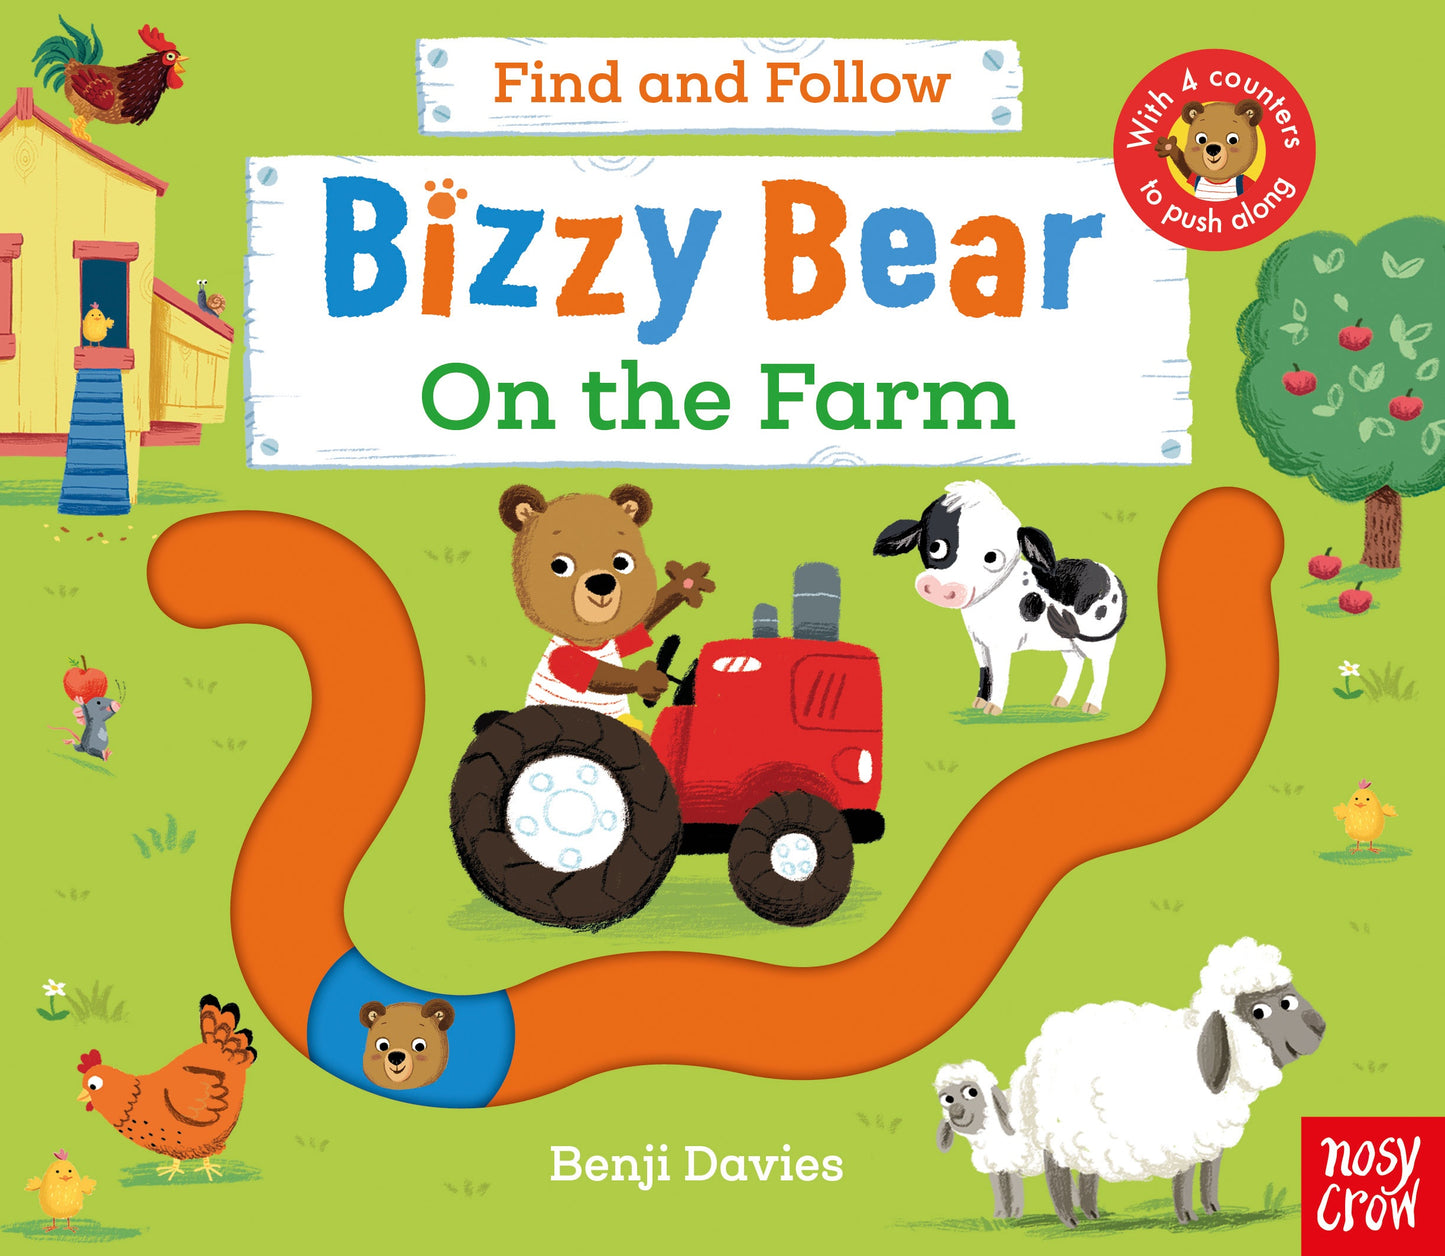 Bizzy Bear On the Farm: Find and Follow